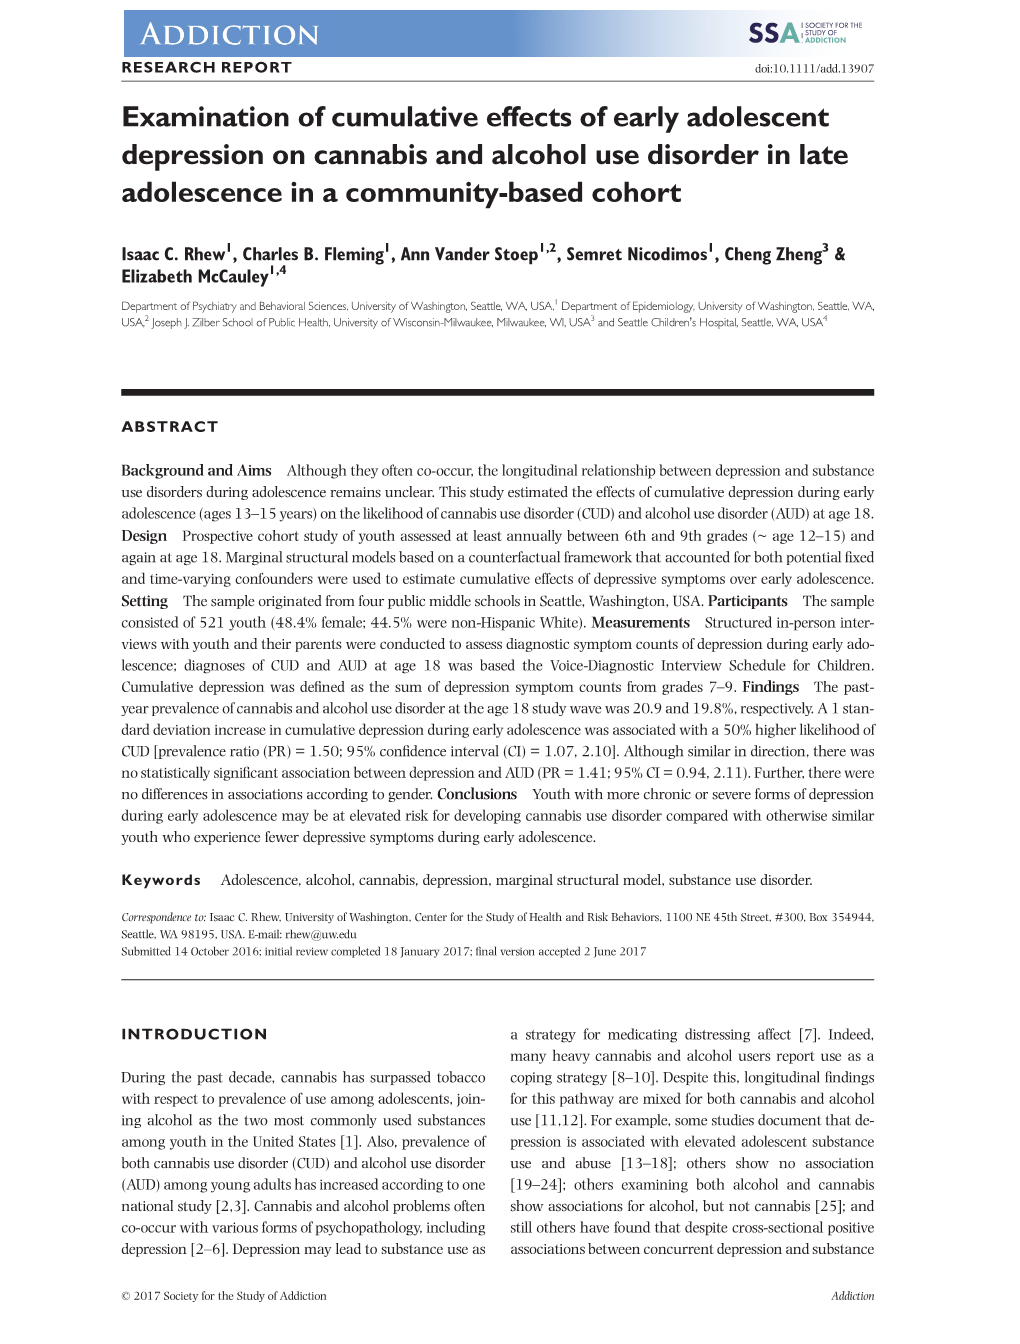 Examination of Cumulative Effects of Early Adolescent Depression on Cannabis and Alcohol Use Disorder in Late Adolescence in a Community-Based Cohort